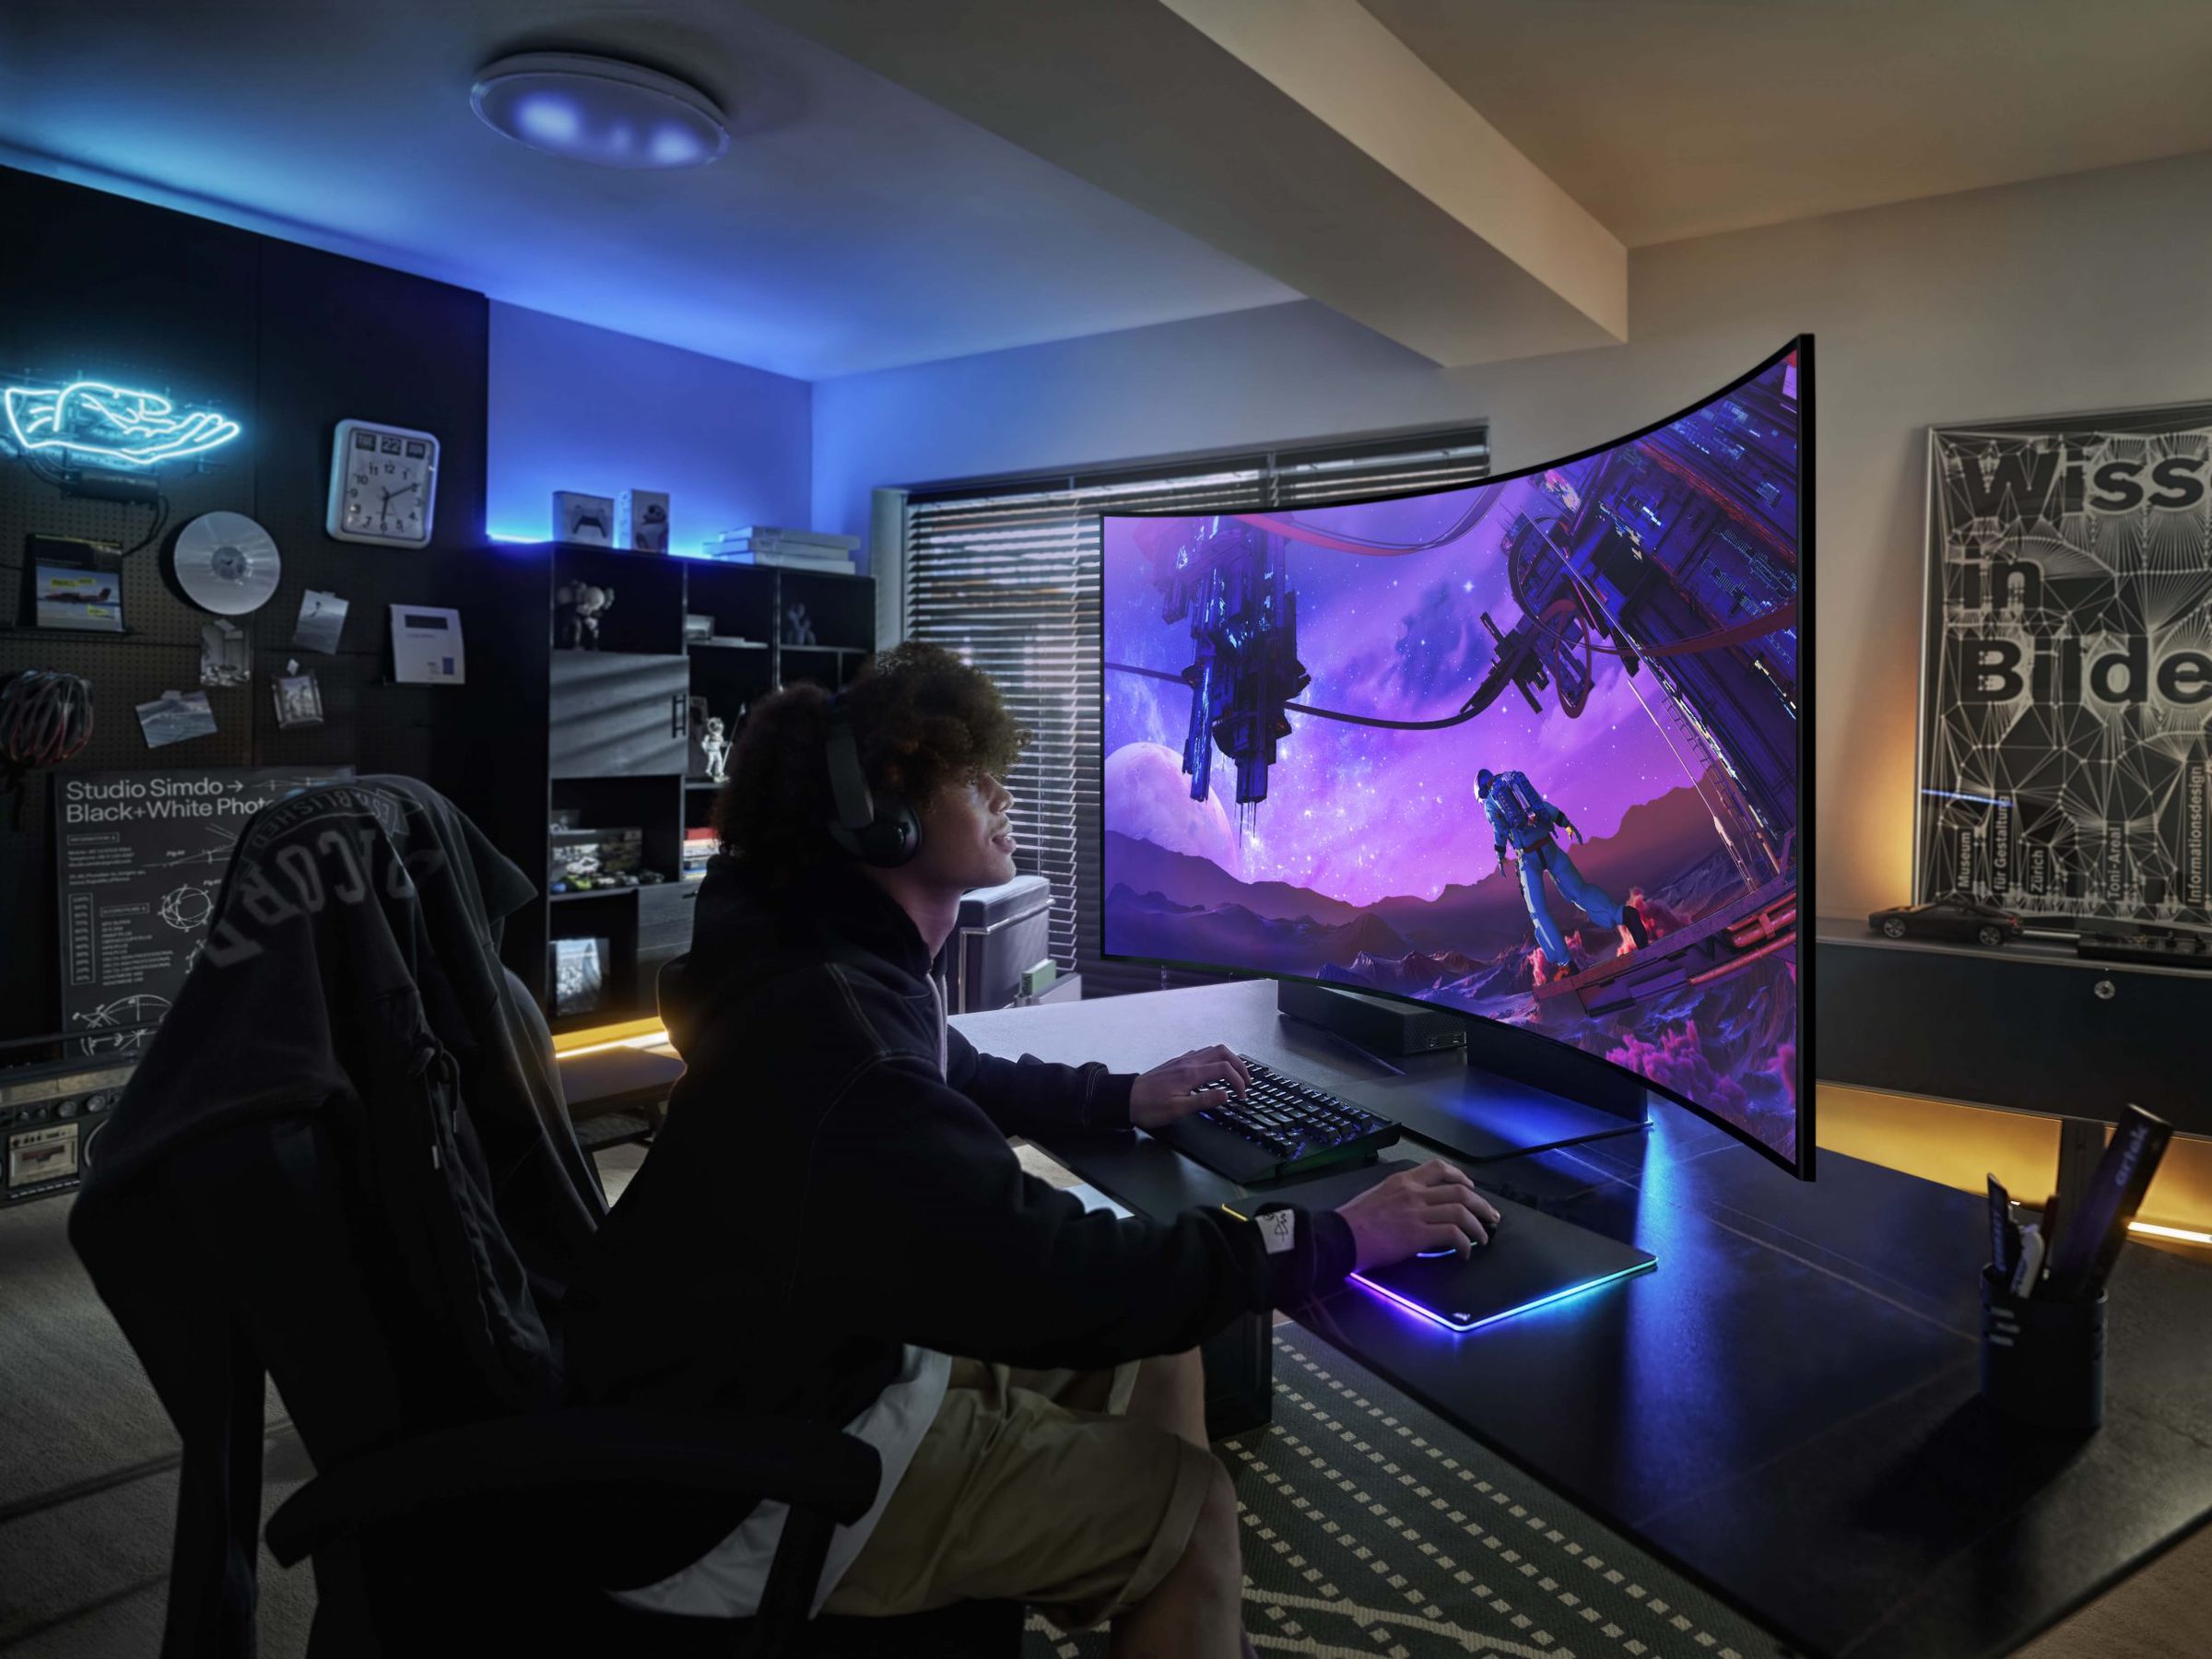 Image of someone gaming on the Odyssey Ark. Even in landscape mode, the top of the screen is significantly taller than they are.